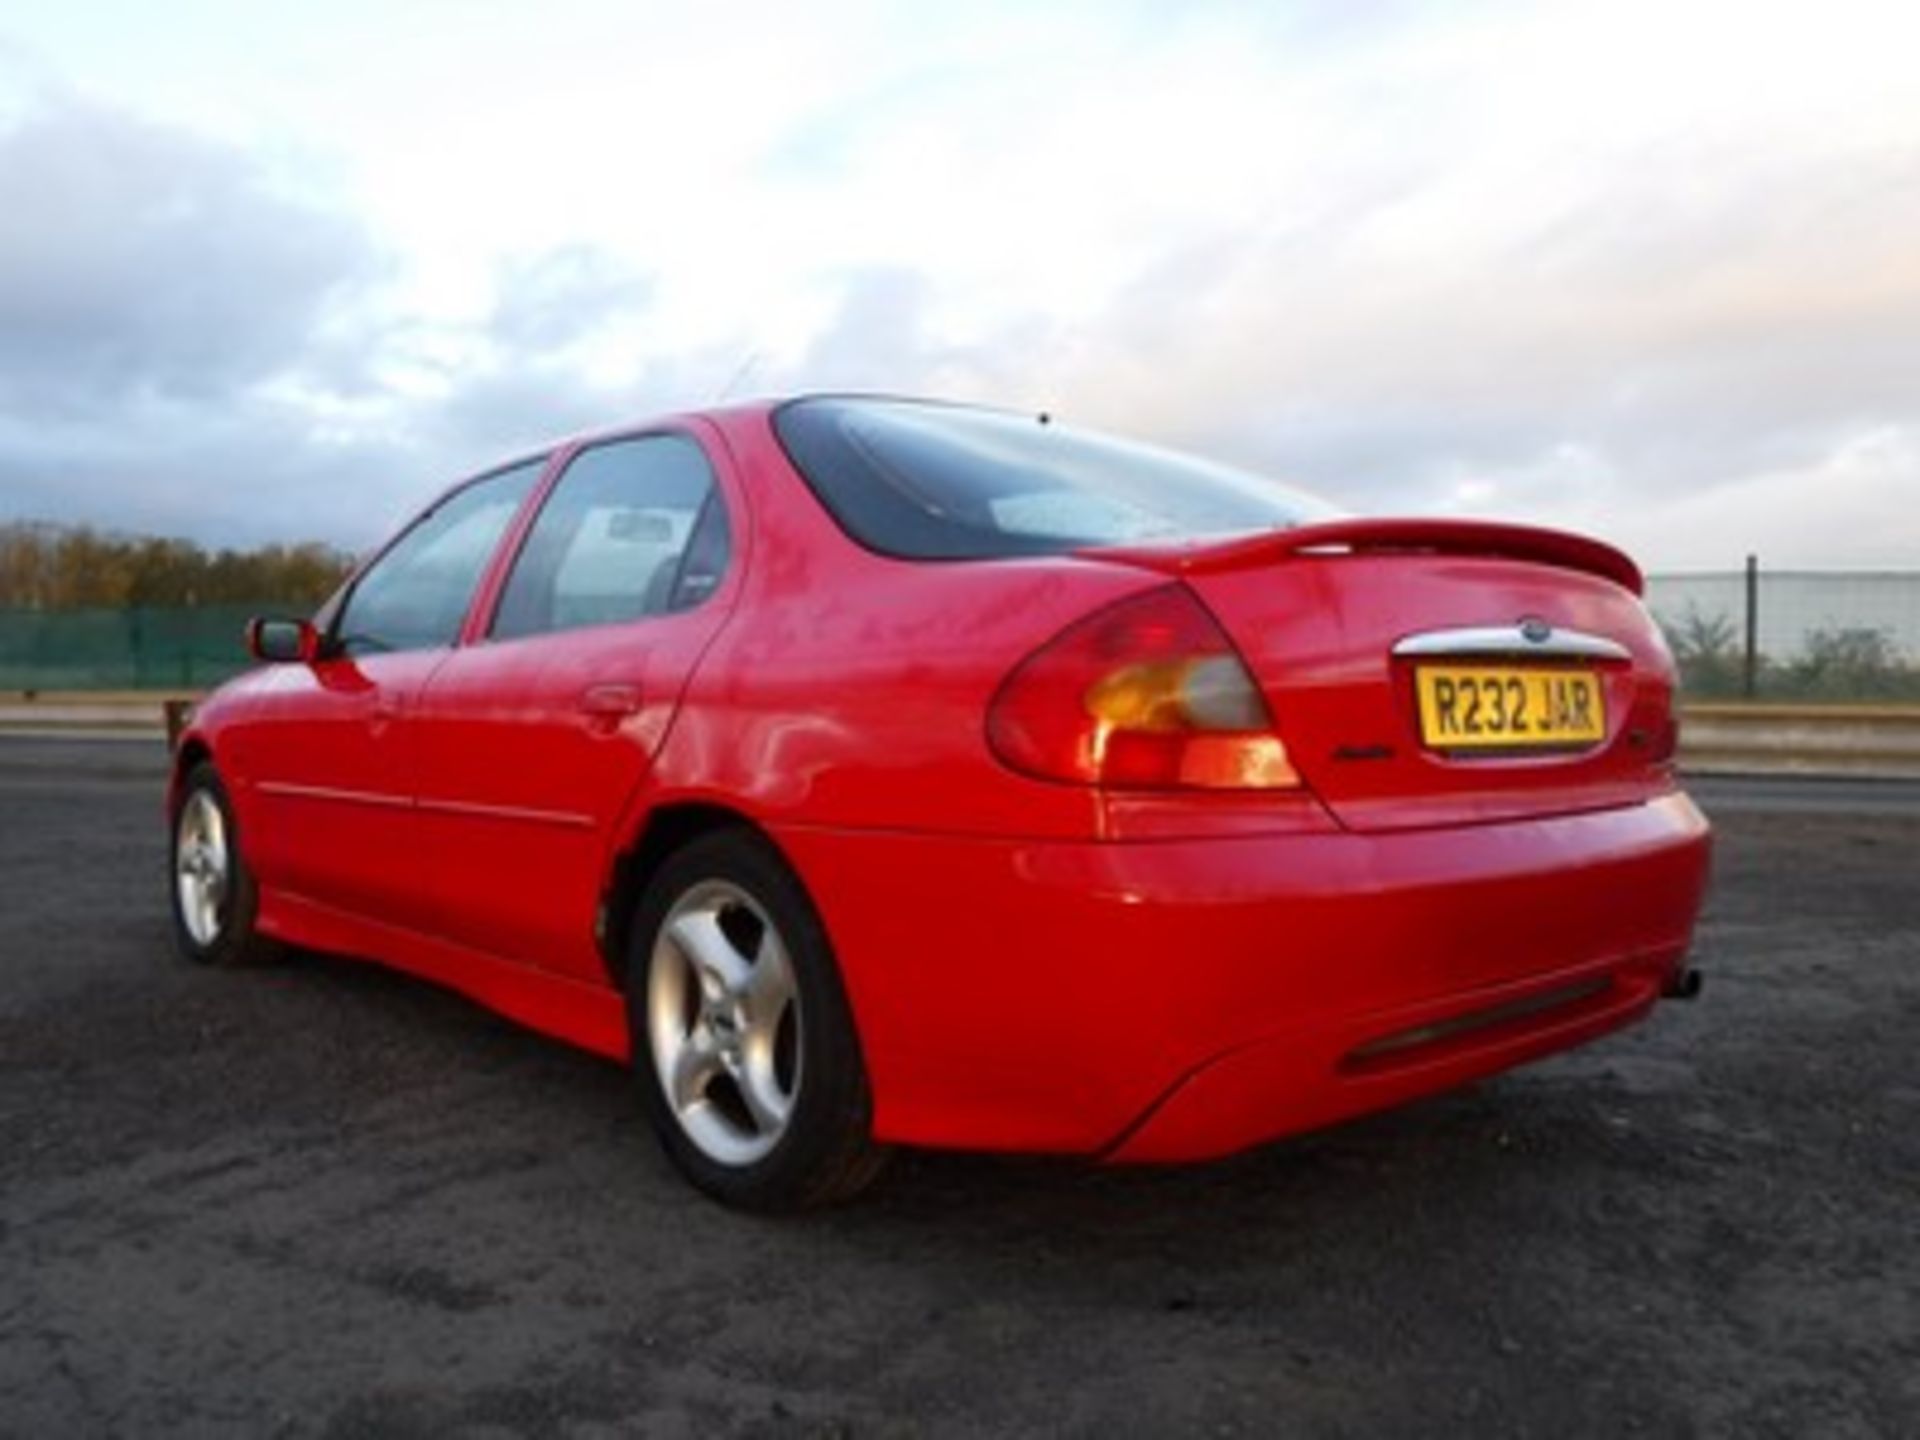 FORD MONDEO ST 24 V6 - 2497cc - Image 5 of 12